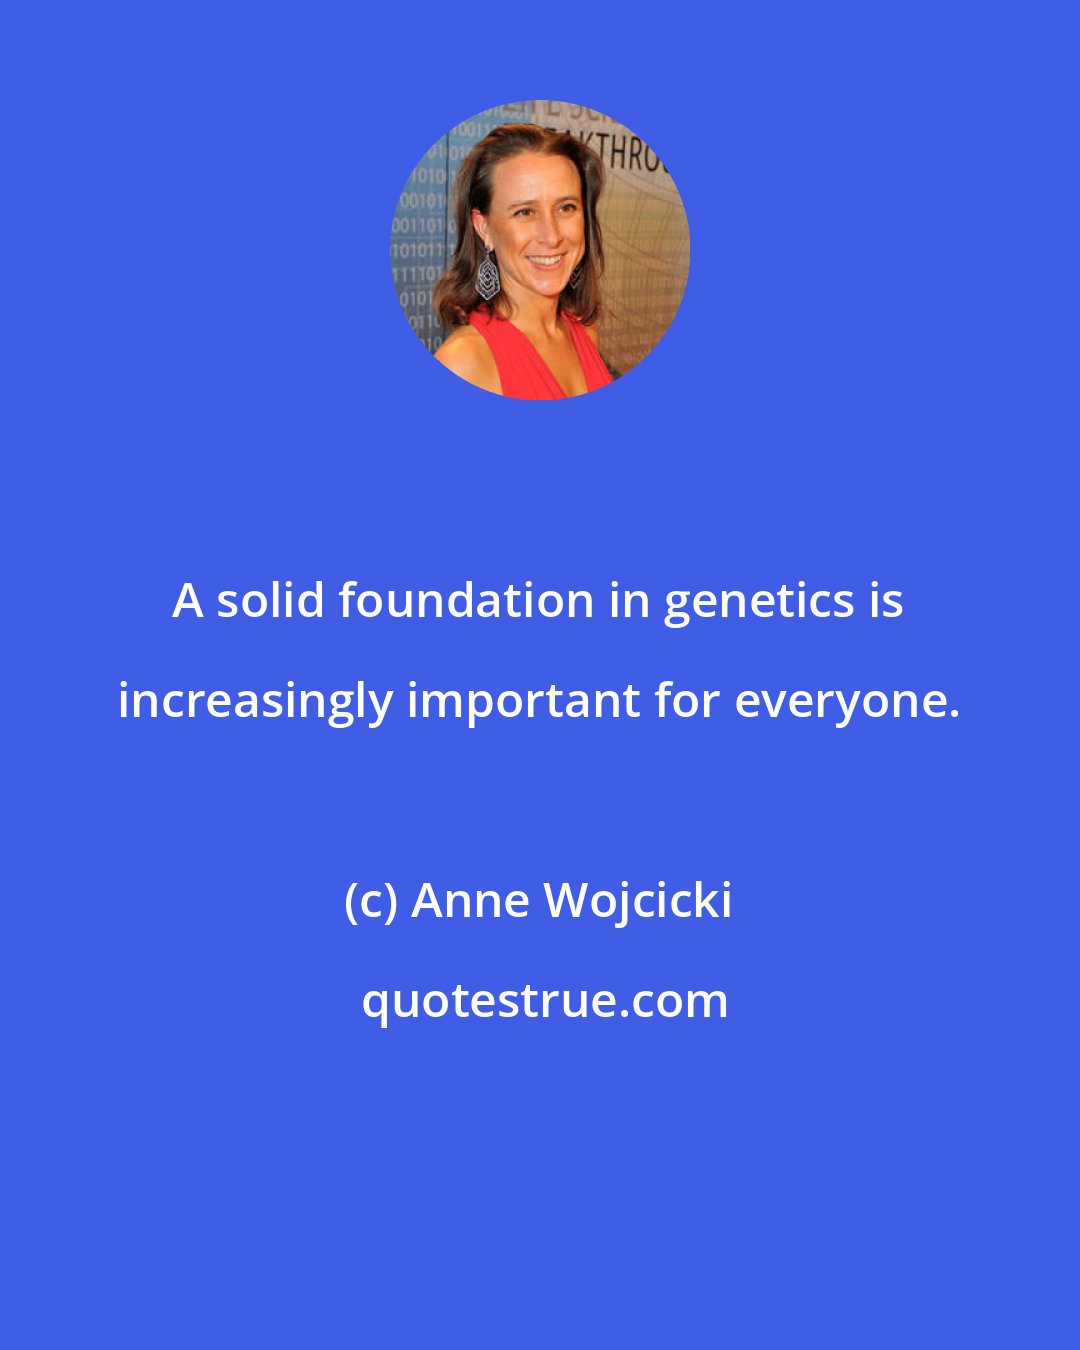 Anne Wojcicki: A solid foundation in genetics is increasingly important for everyone.